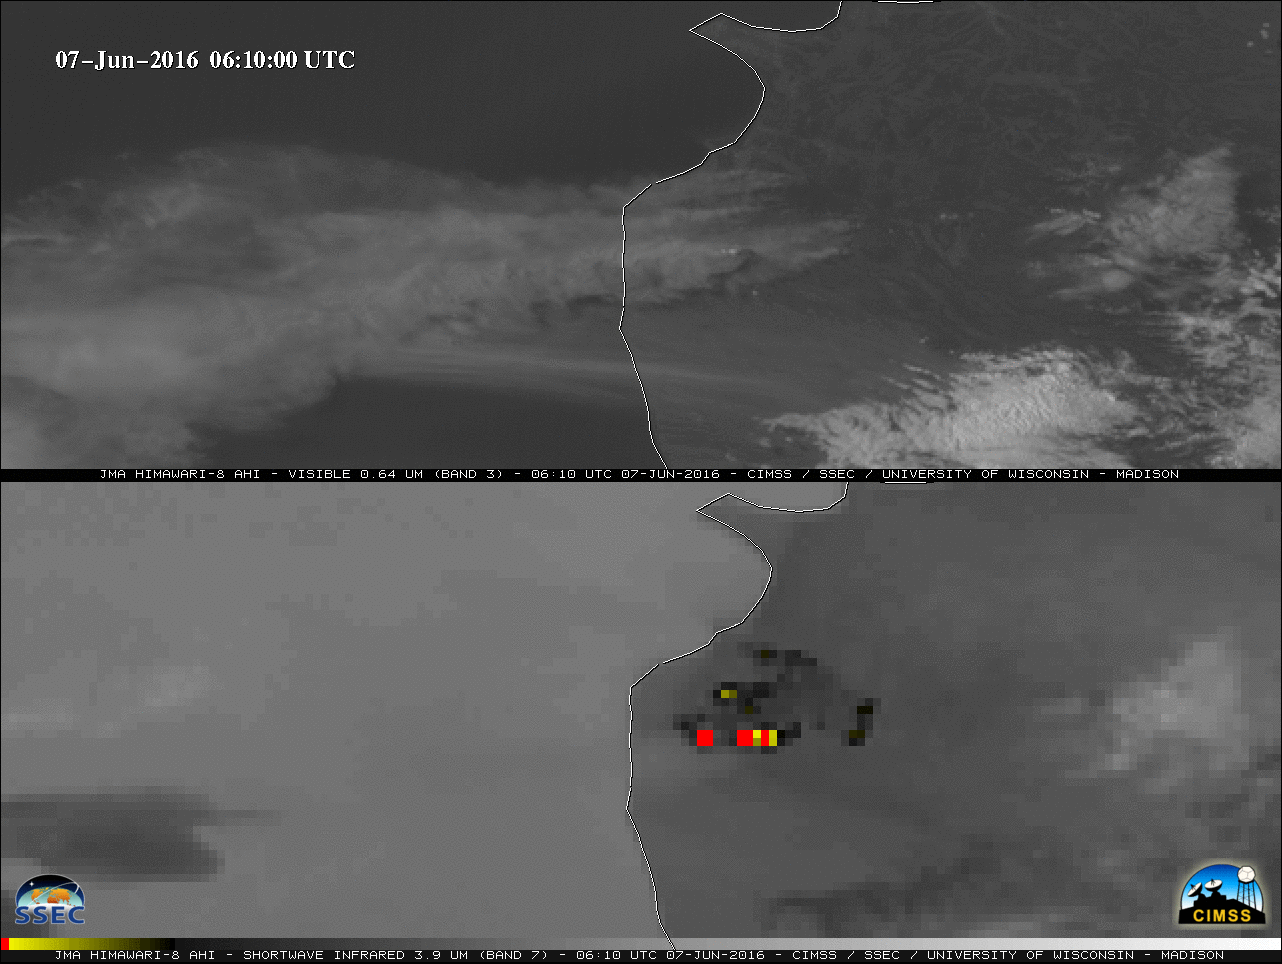 Himawari-8 0.64 µm Visible (top) and 3.9 µm Shortwave Infrared (bottom) images [click to play animation]